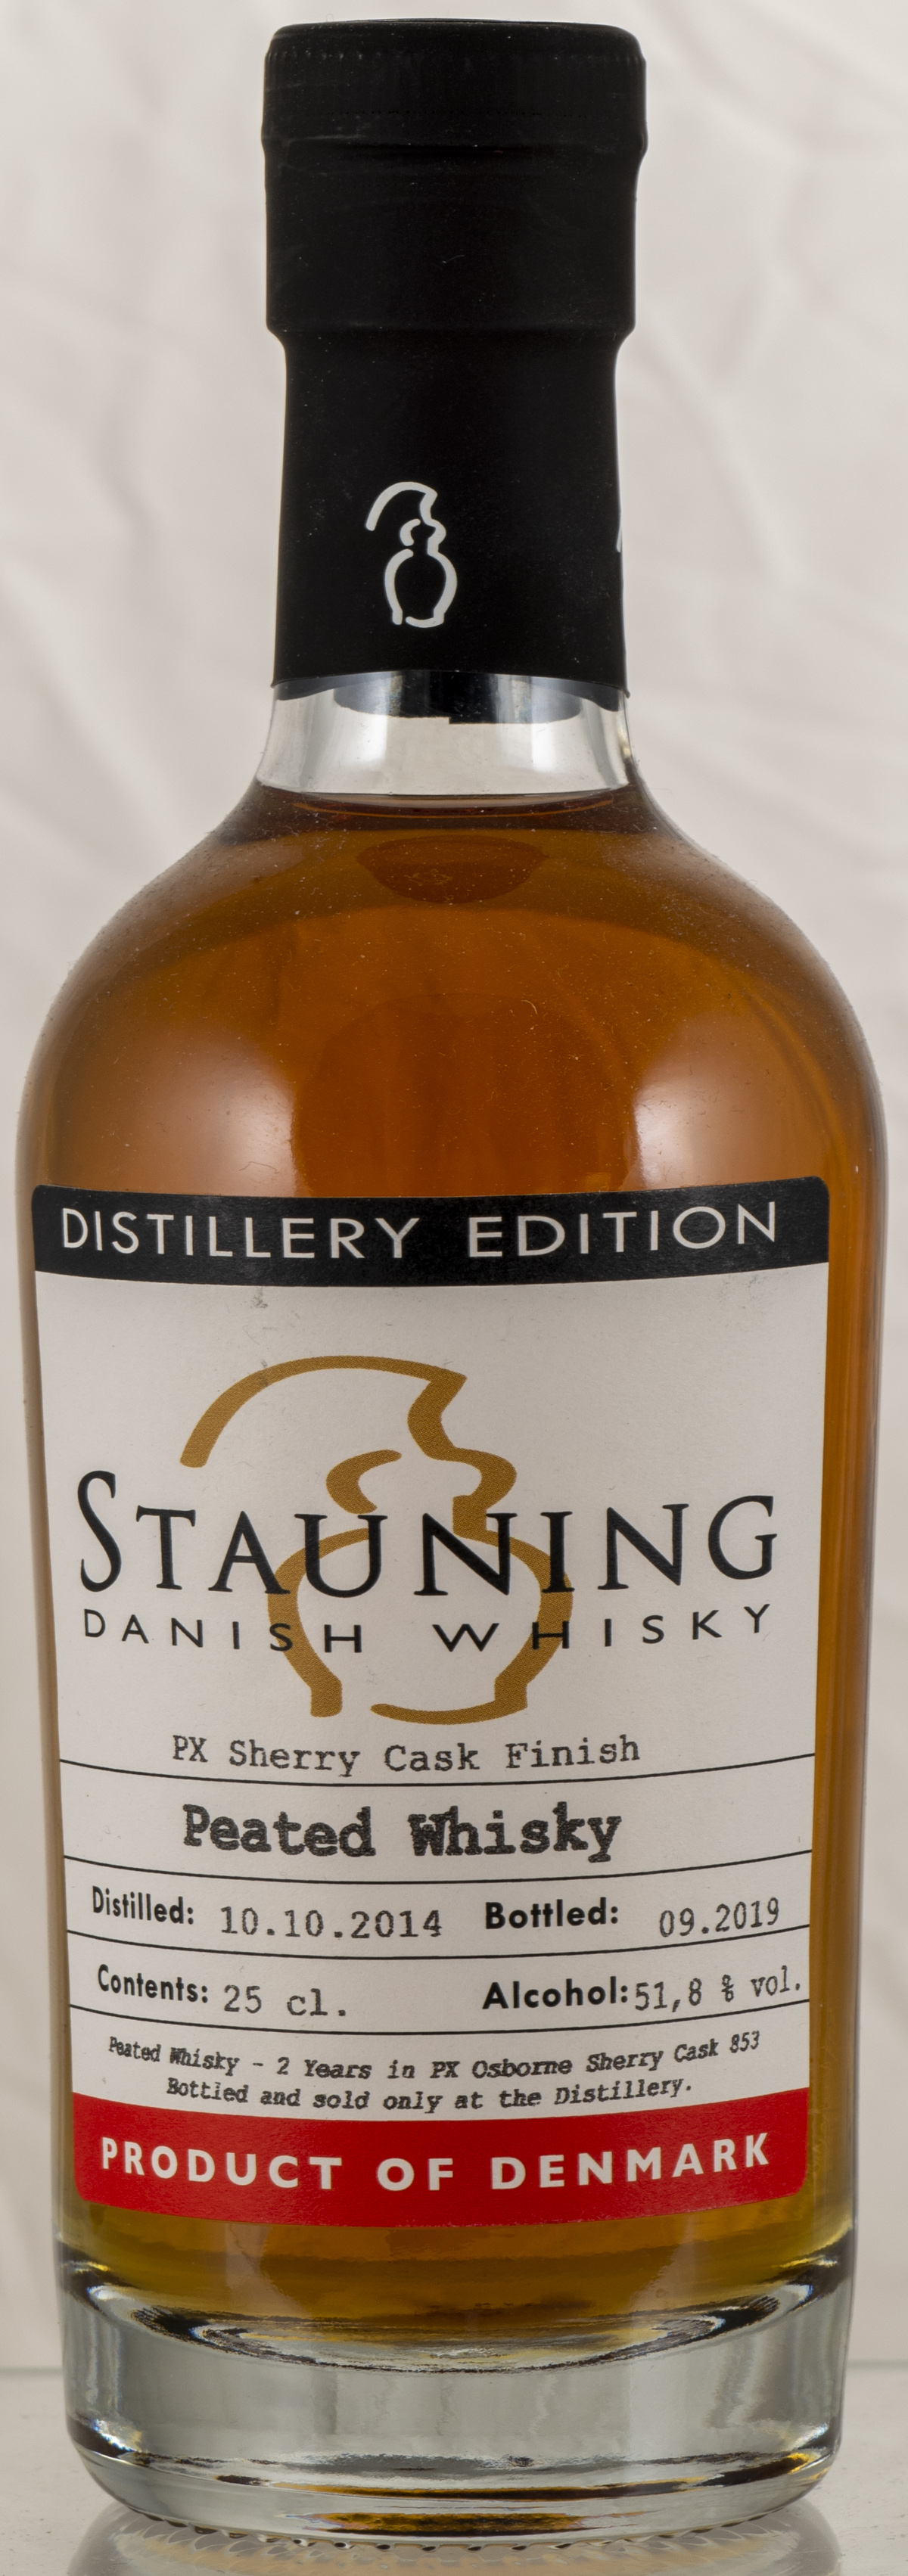 Billede: PHC_4052 Stauning Distillery Edition PX finish Peated 2014-2019 - bottle front.jpg